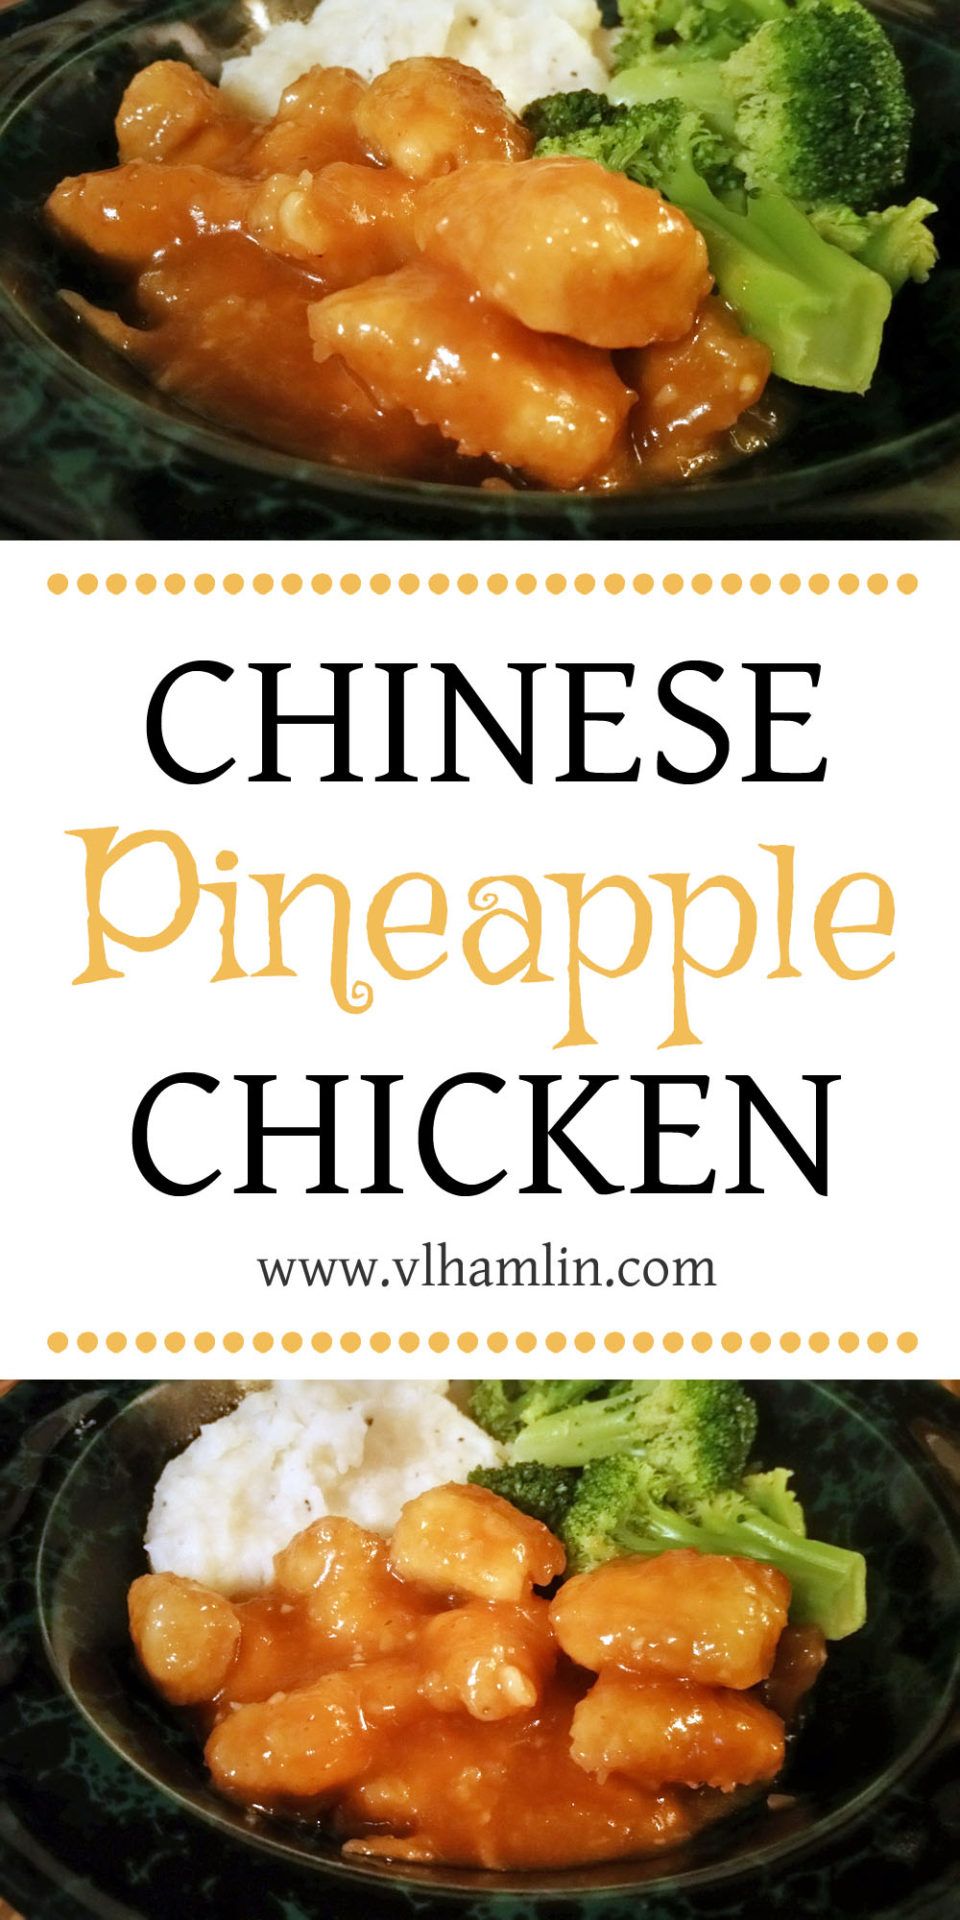 Chinese Pineapple Chicken: Ready in 30 Minutes or Less! - Food Life Design